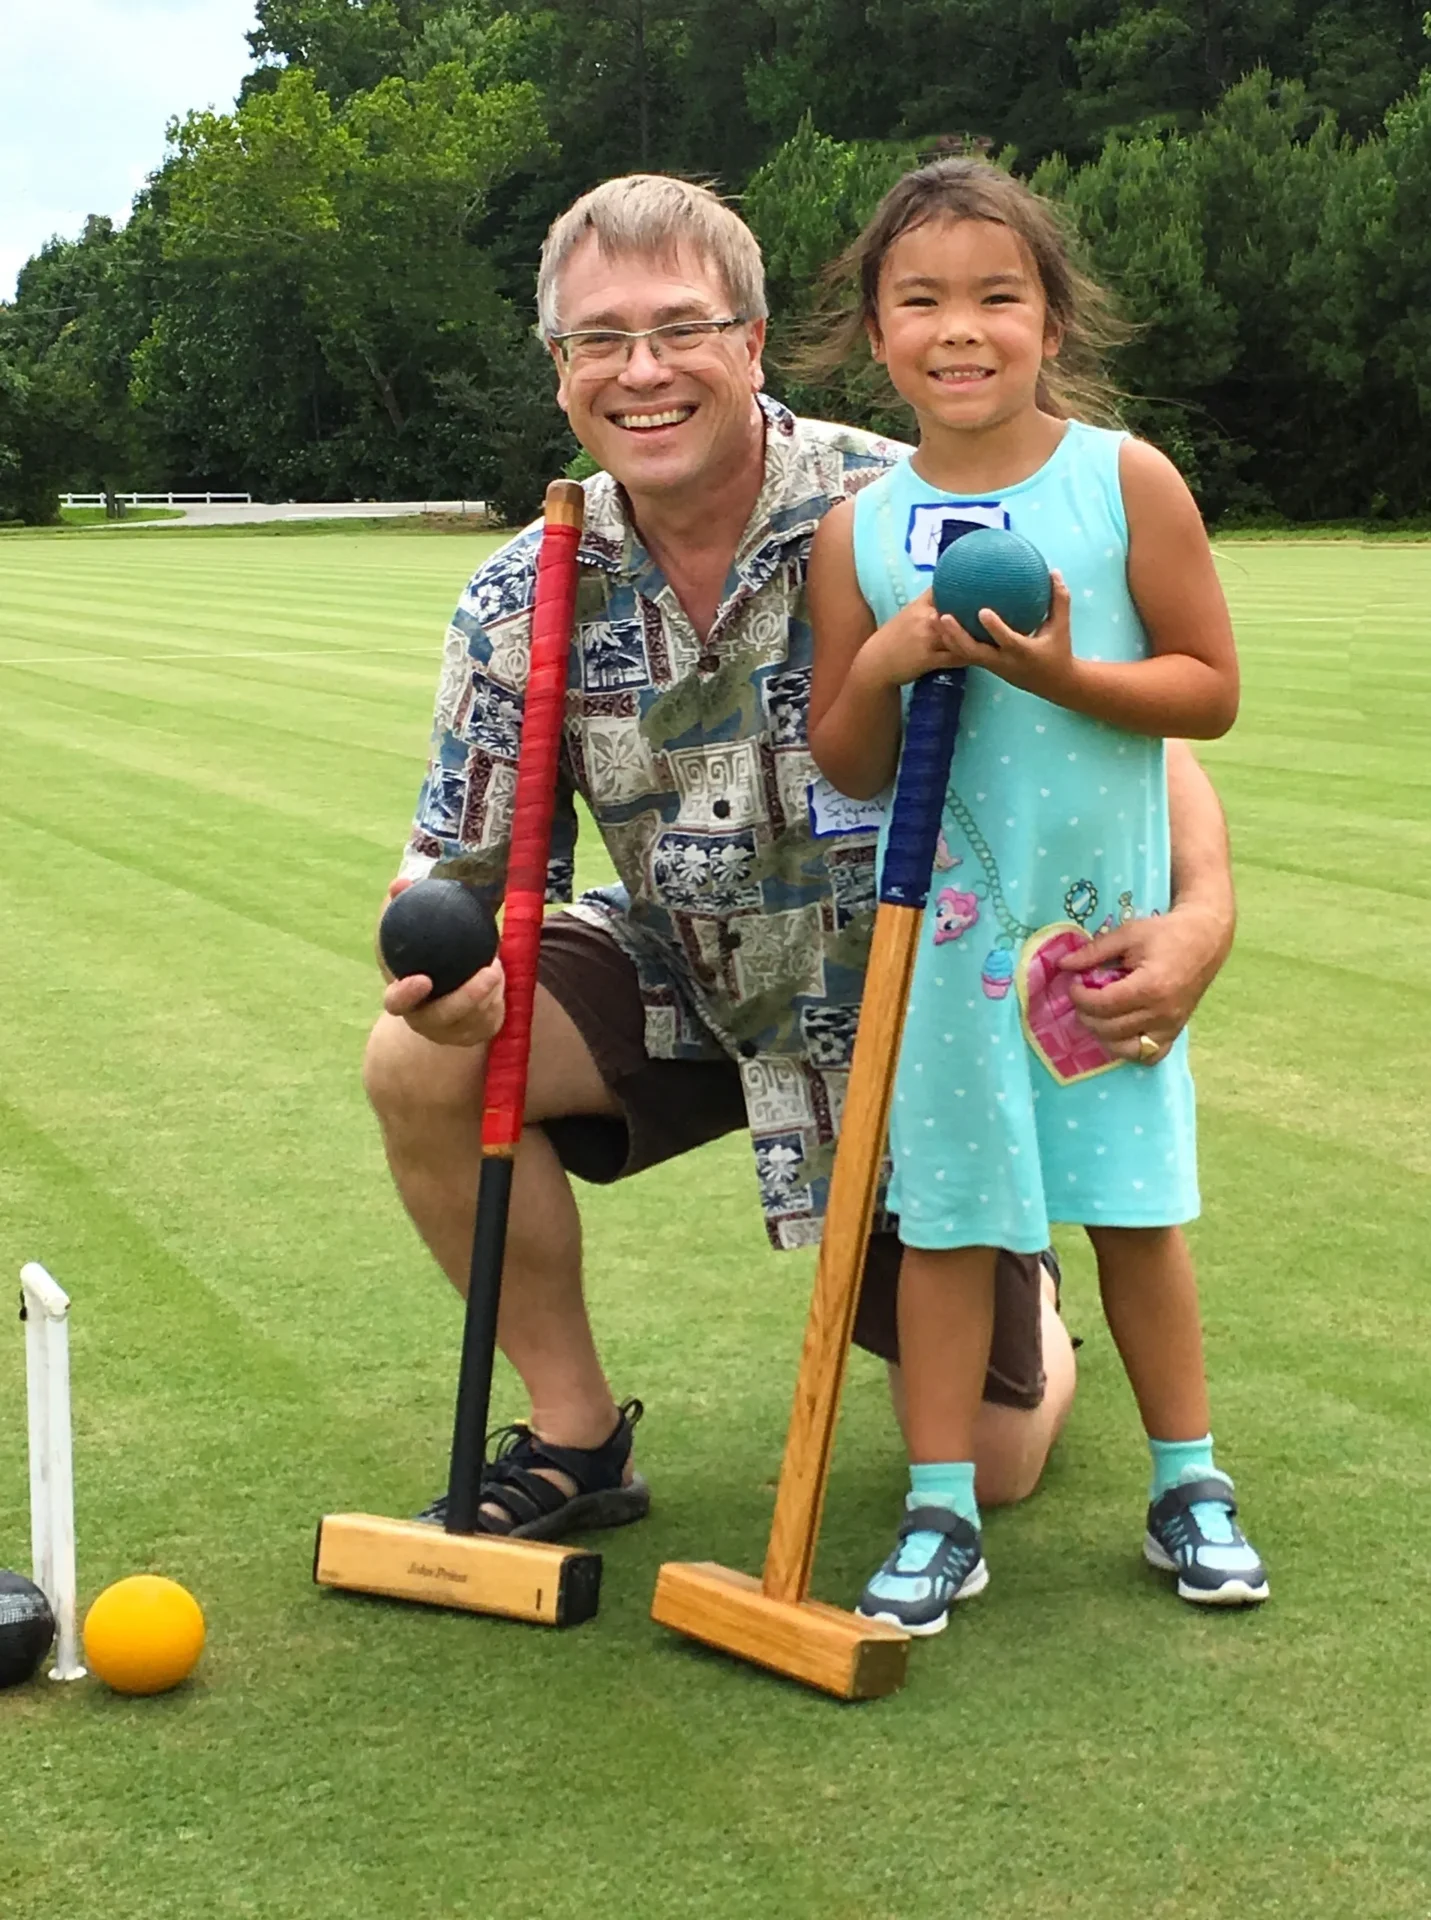 A man and girl are playing croquet on the grass.